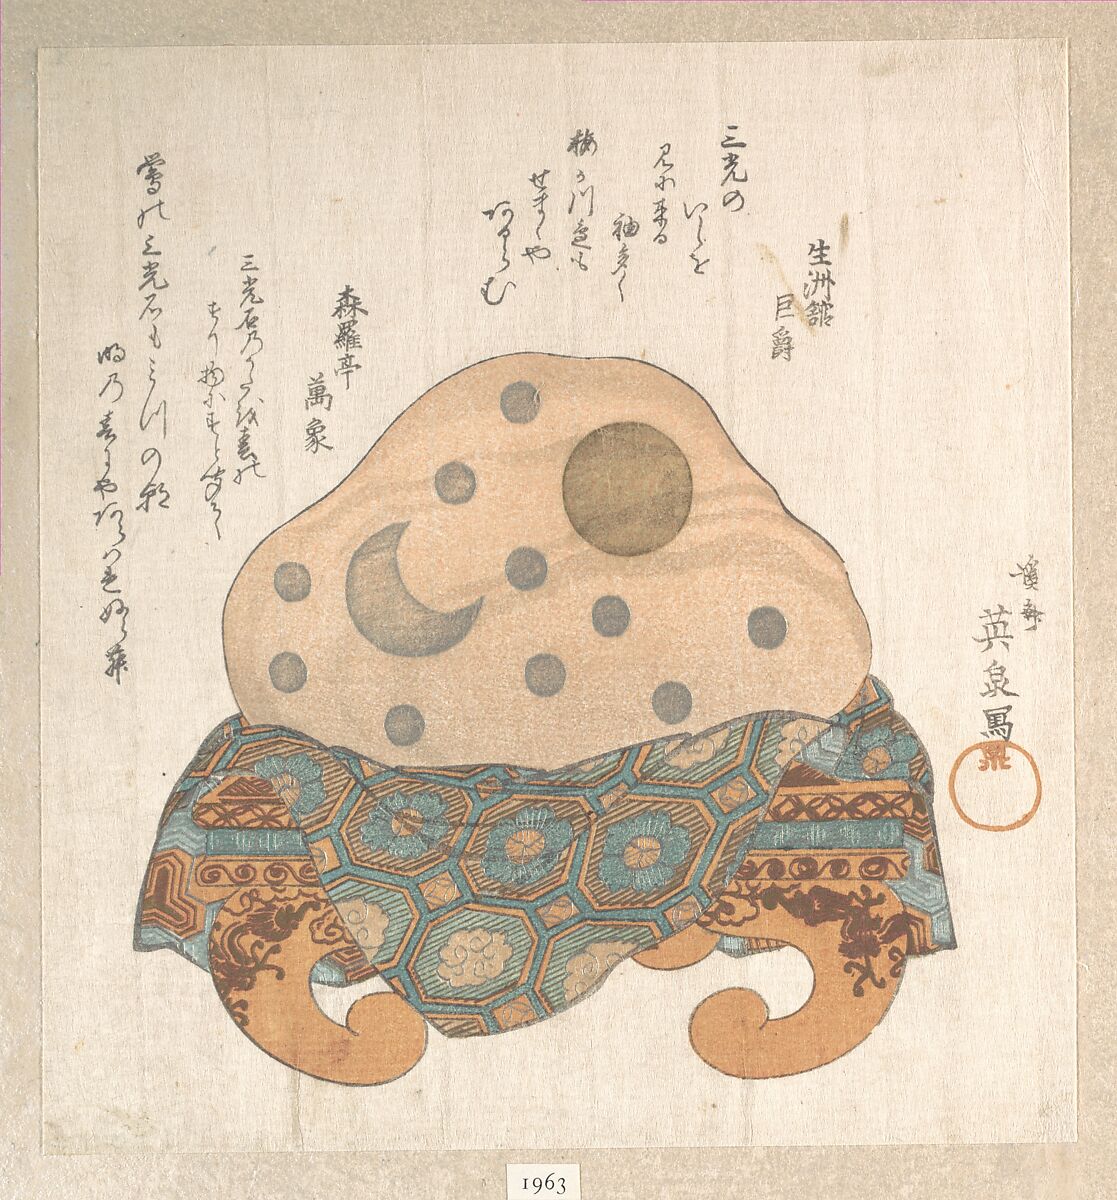 Stone of Three Lights: Sun, Moon and Star, Keisai Eisen (Japanese, 1790–1848), Woodblock print (surimono); ink and color on paper, Japan 